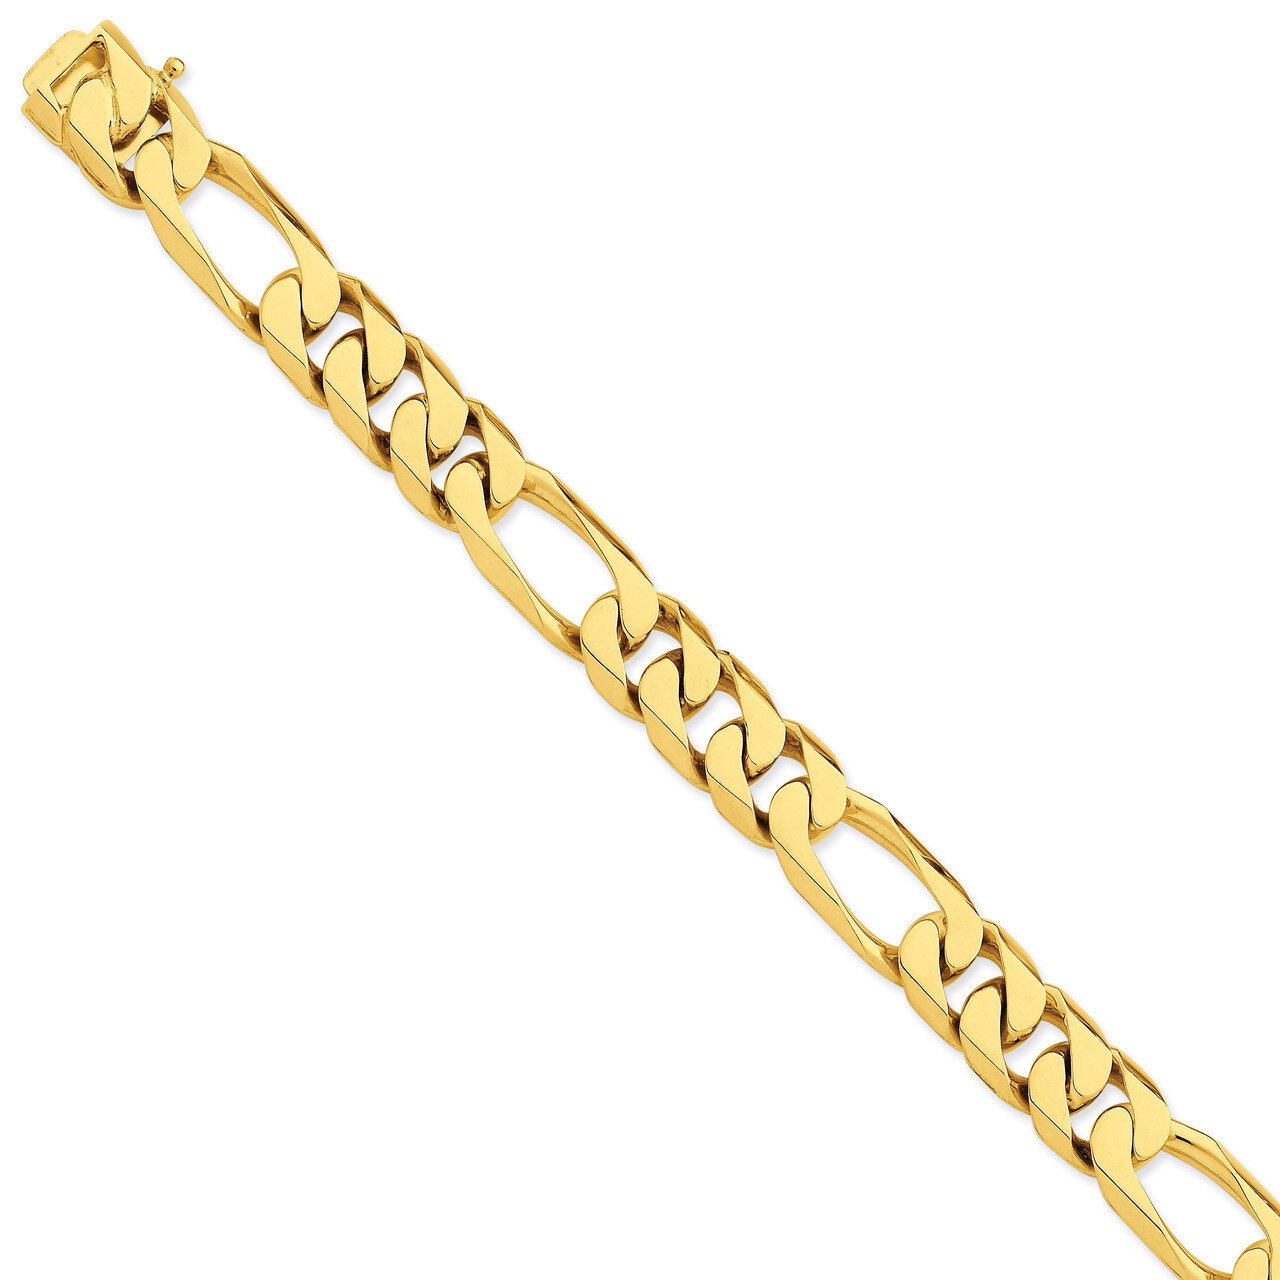 13mm Hand-polished Figaro Link Chain 9 Inch 14k Gold LK111-9